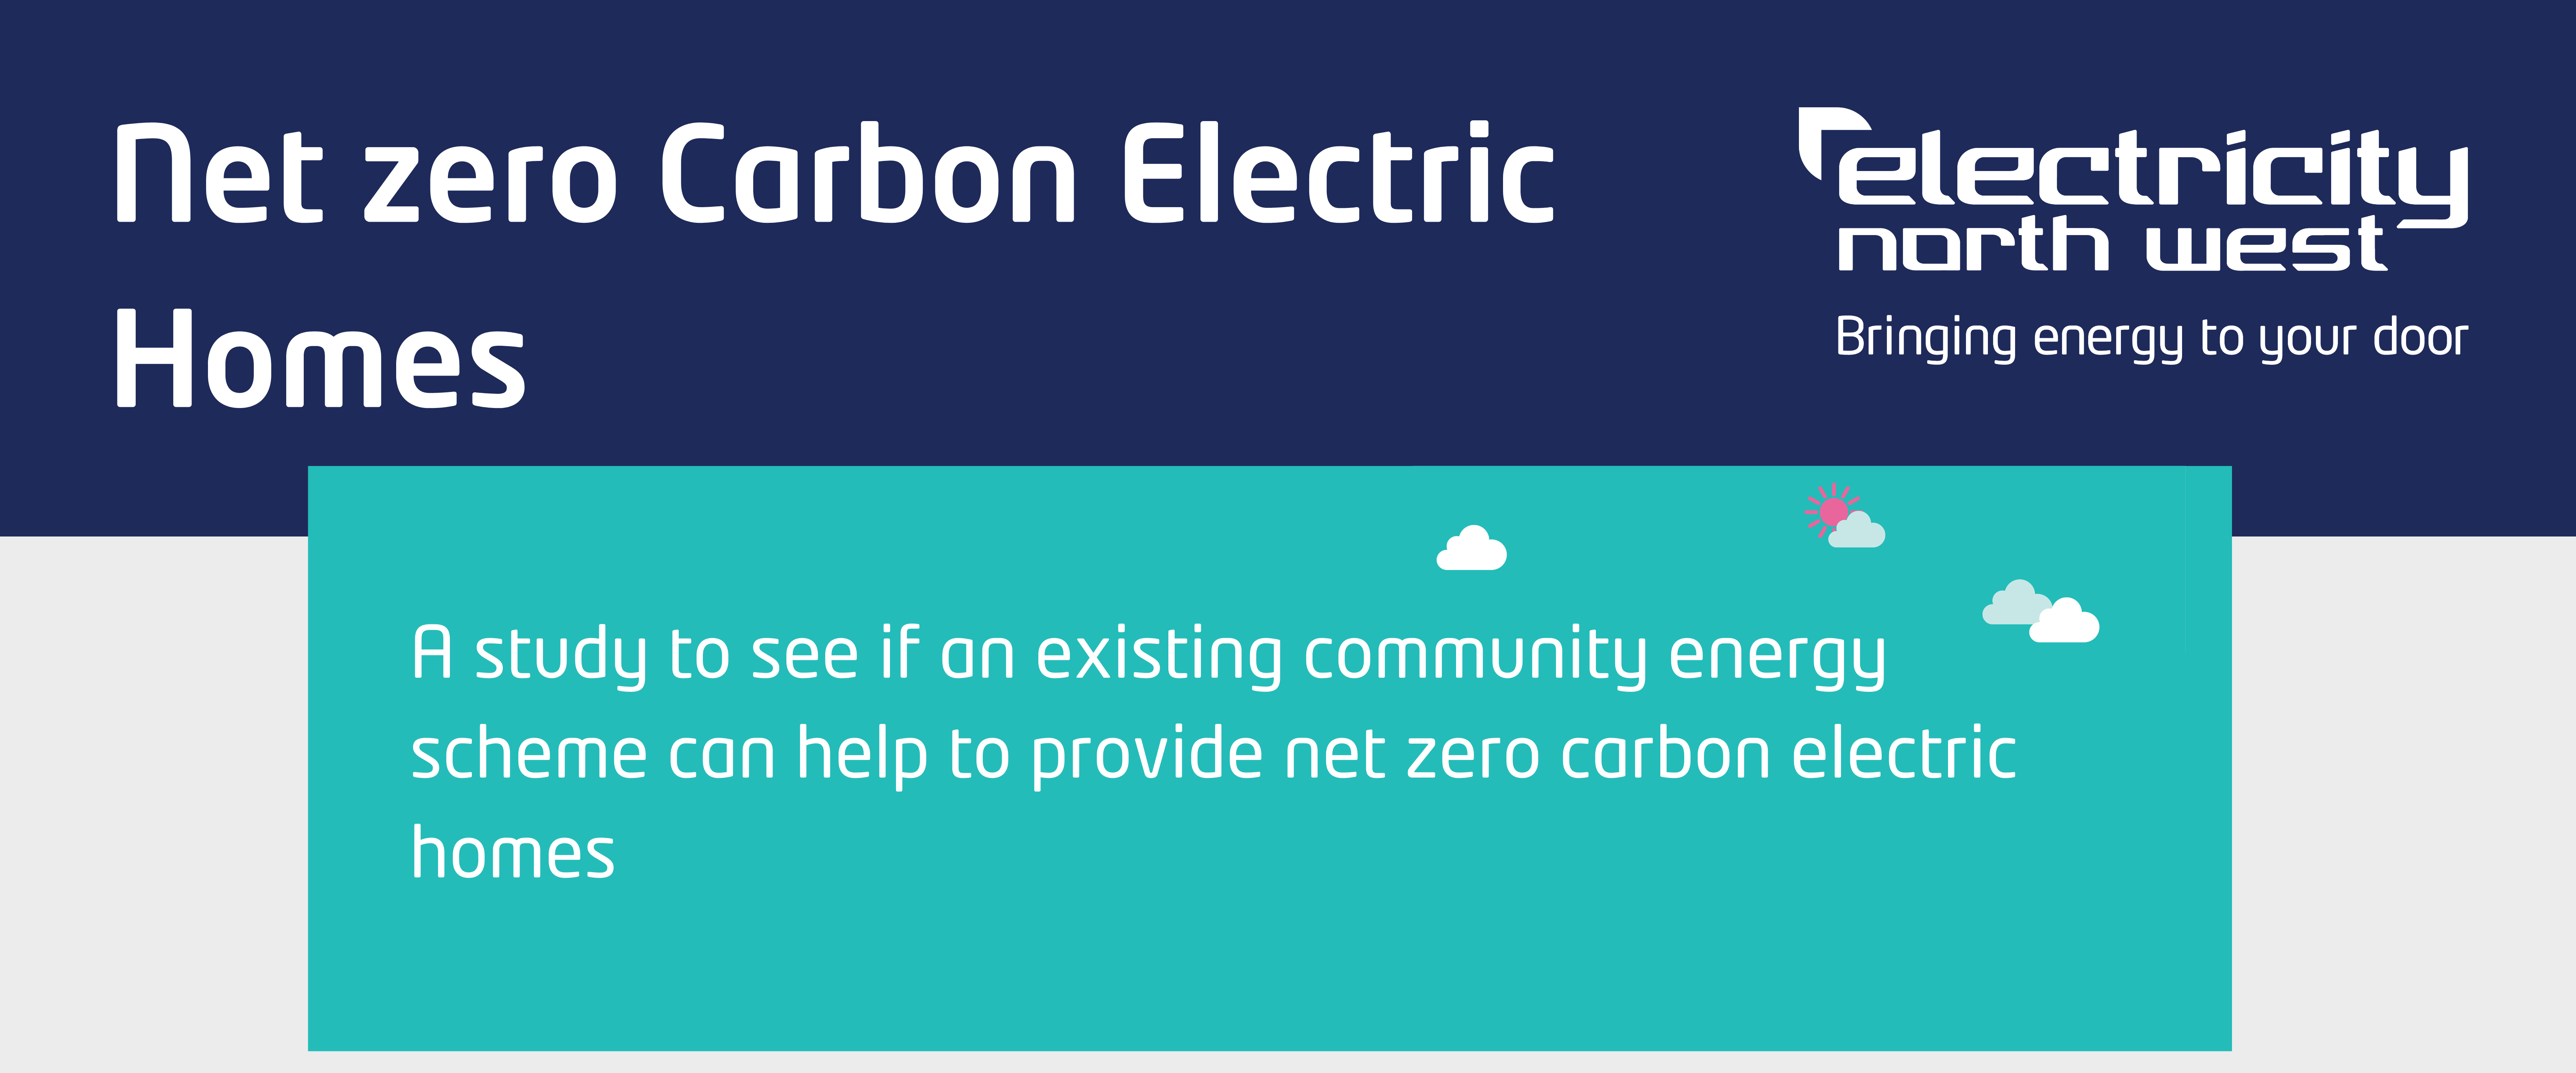 A study to see if an existing community energy scheme can help to provide new zero carbon electric homes